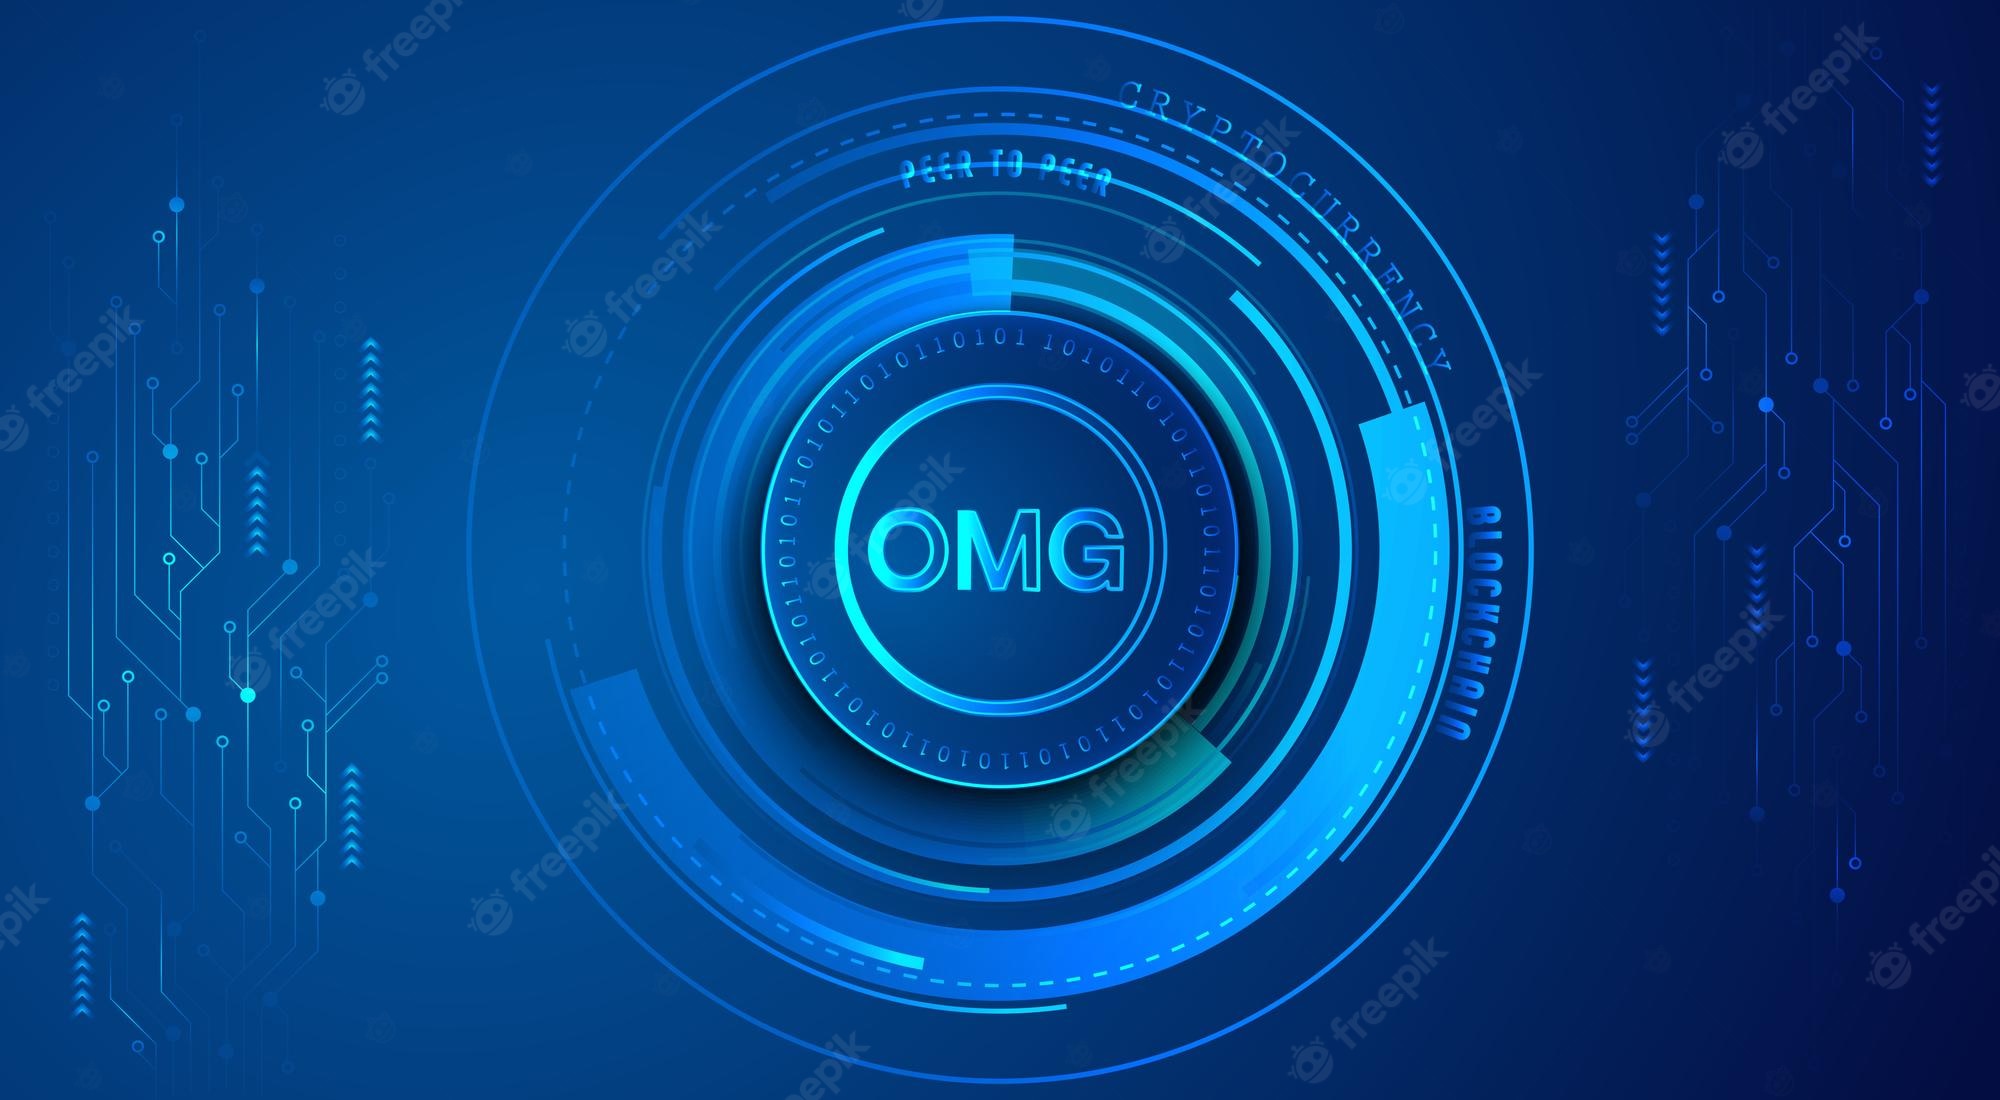 should i invest in omg at the current price Should I invest in OMG at the current price?